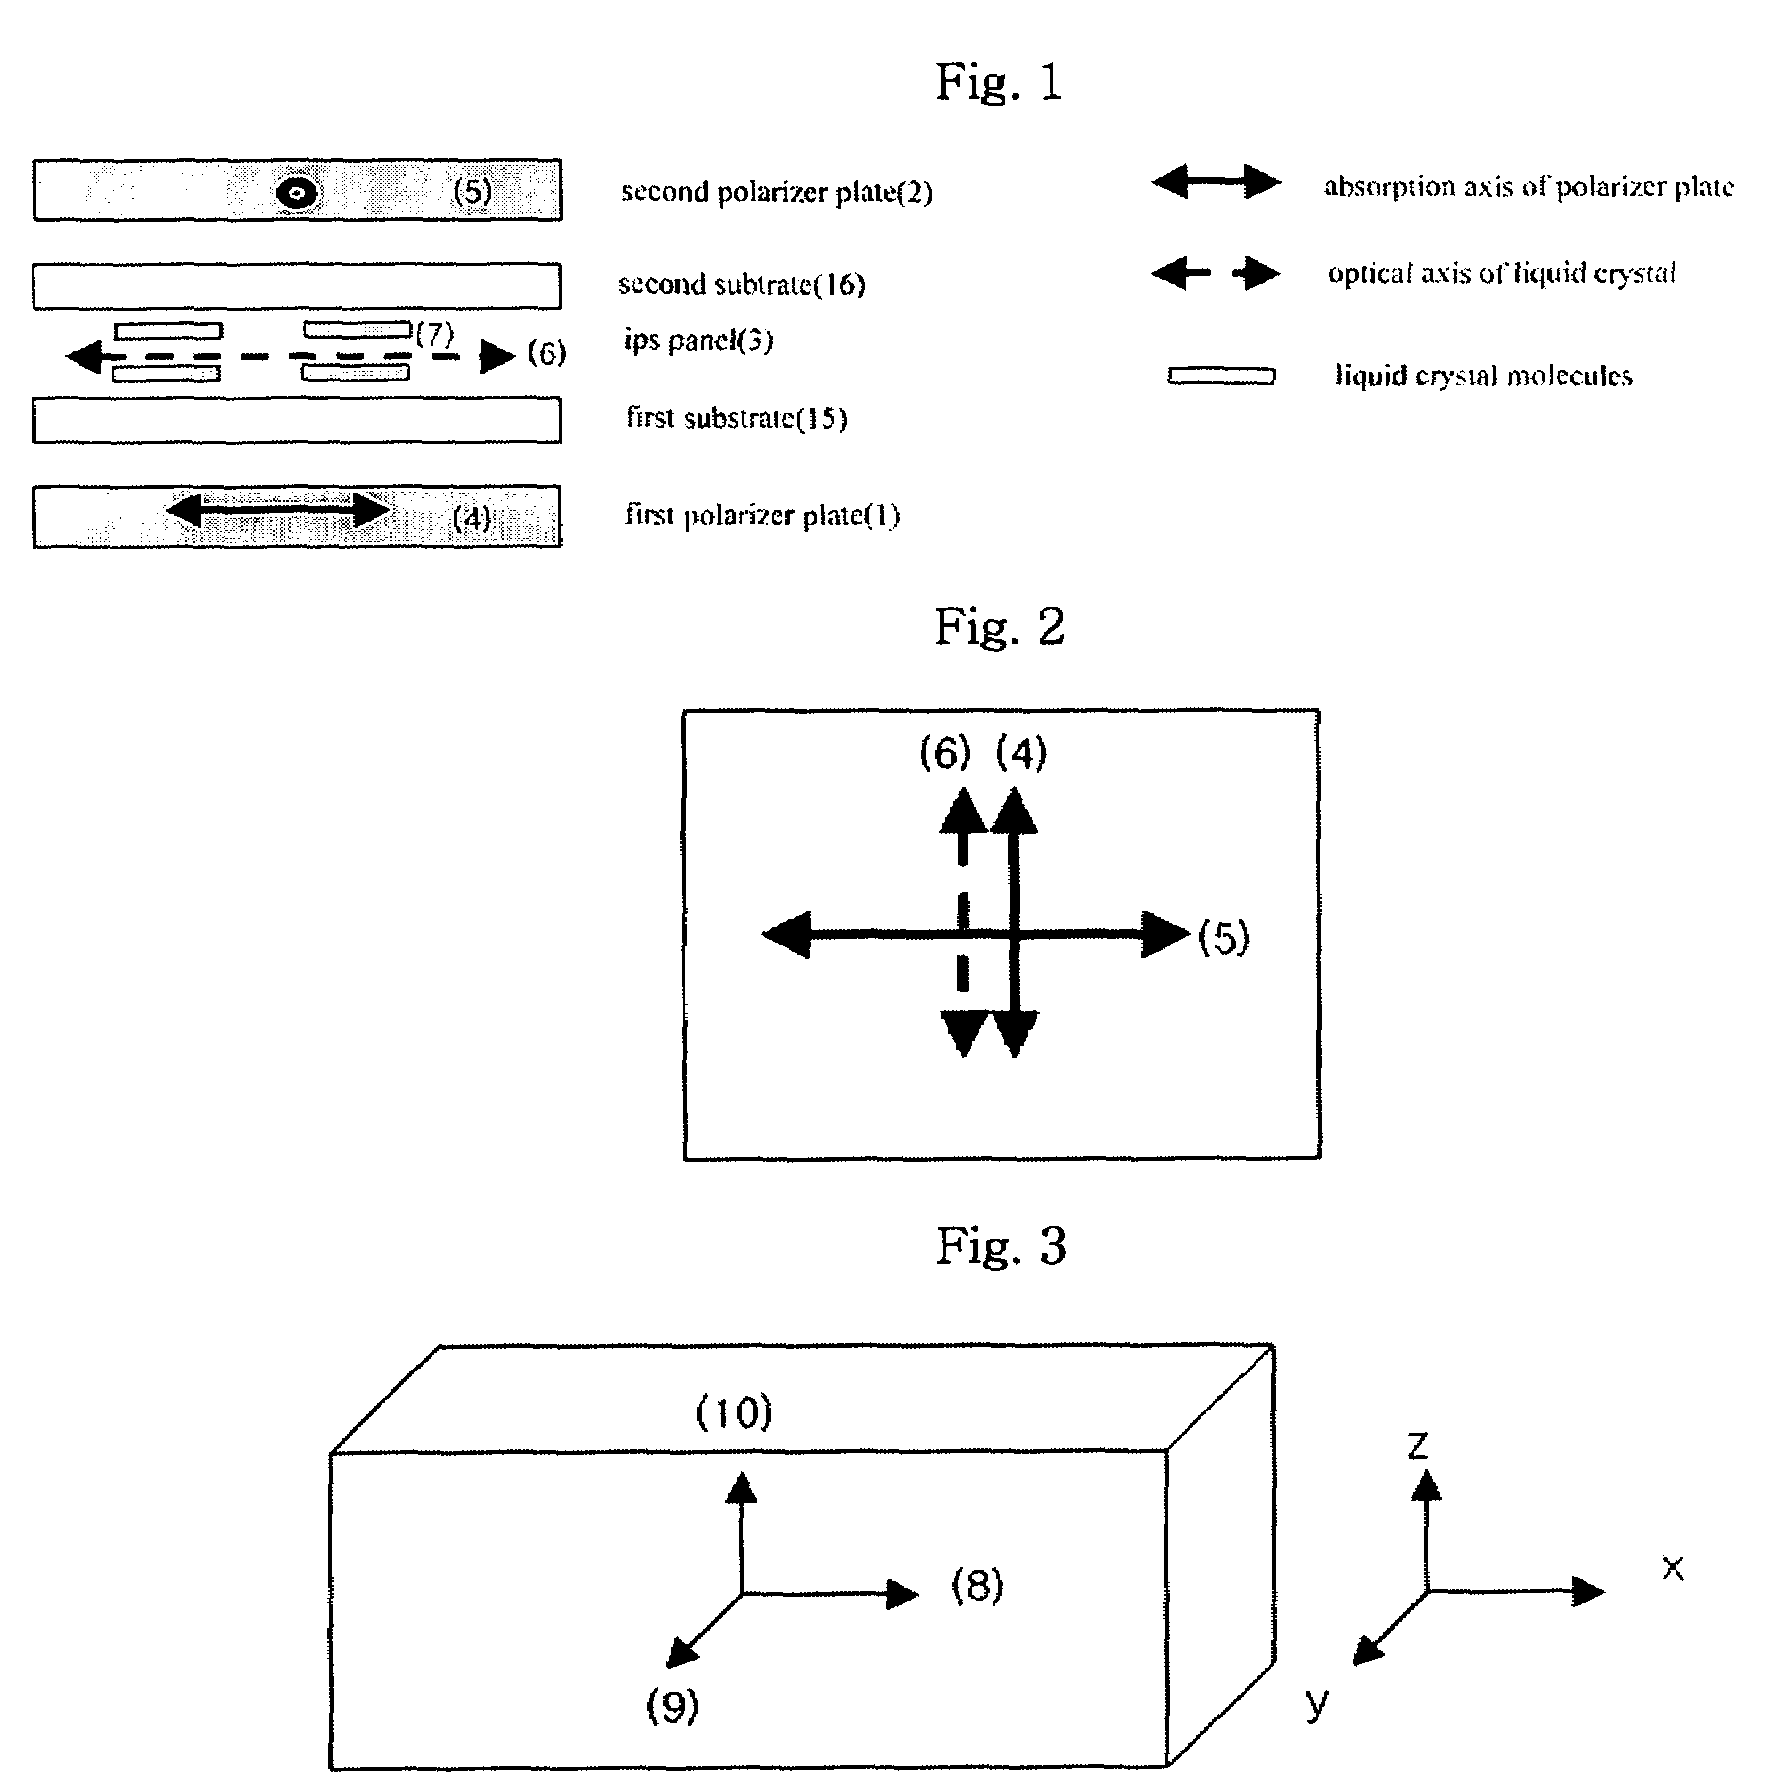 In-plane switching liquid crystal display comprising compensation film for angular field of view using negative biaxial retardation film and (+) C-plate